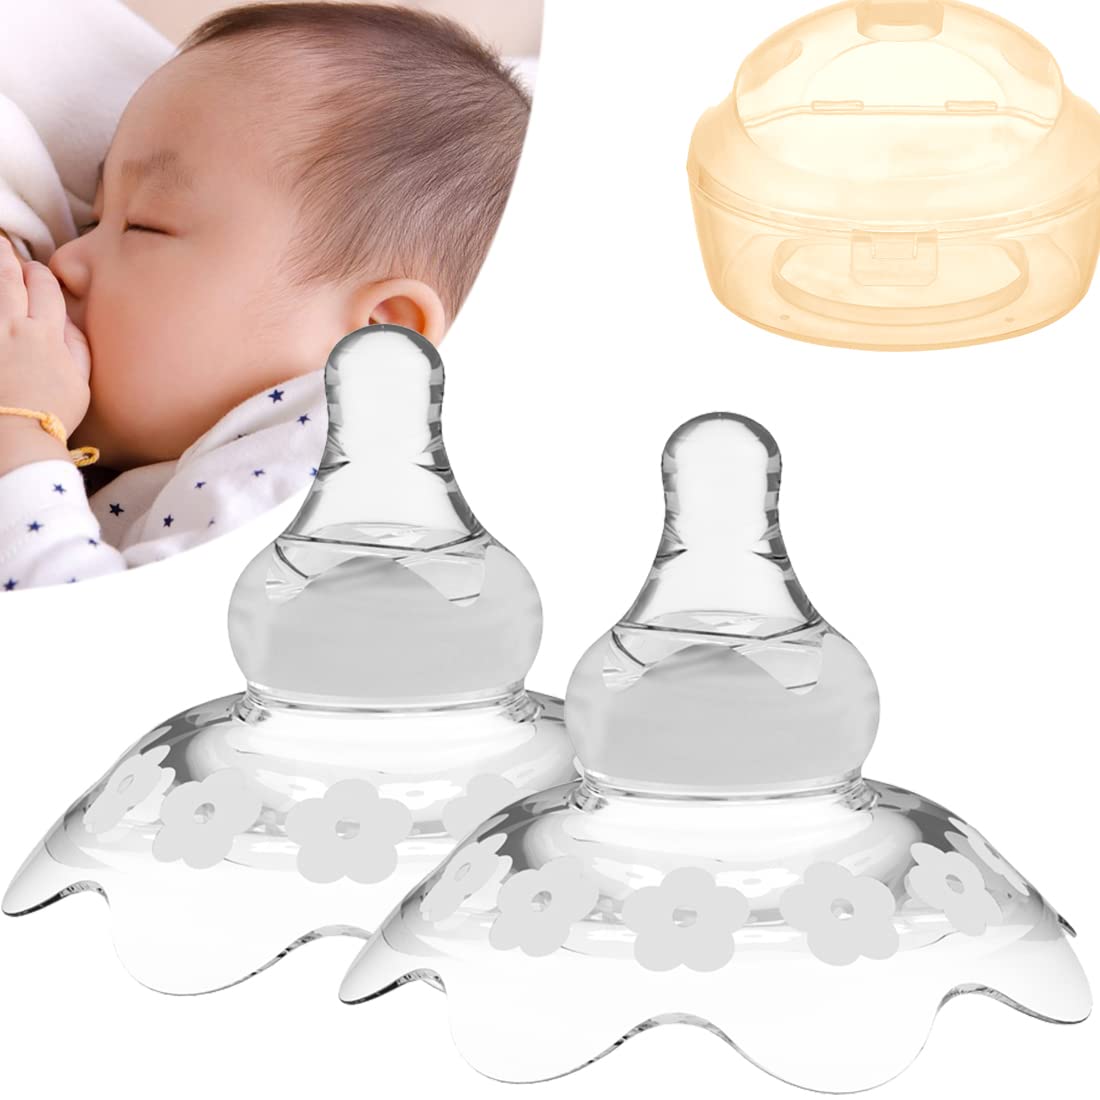 YIYEE Nipple Shield for Breastfeeding 2 count, Upgraded for Protecting Inverted  Sore Nipples, Assisting Latch Difficulties, gre